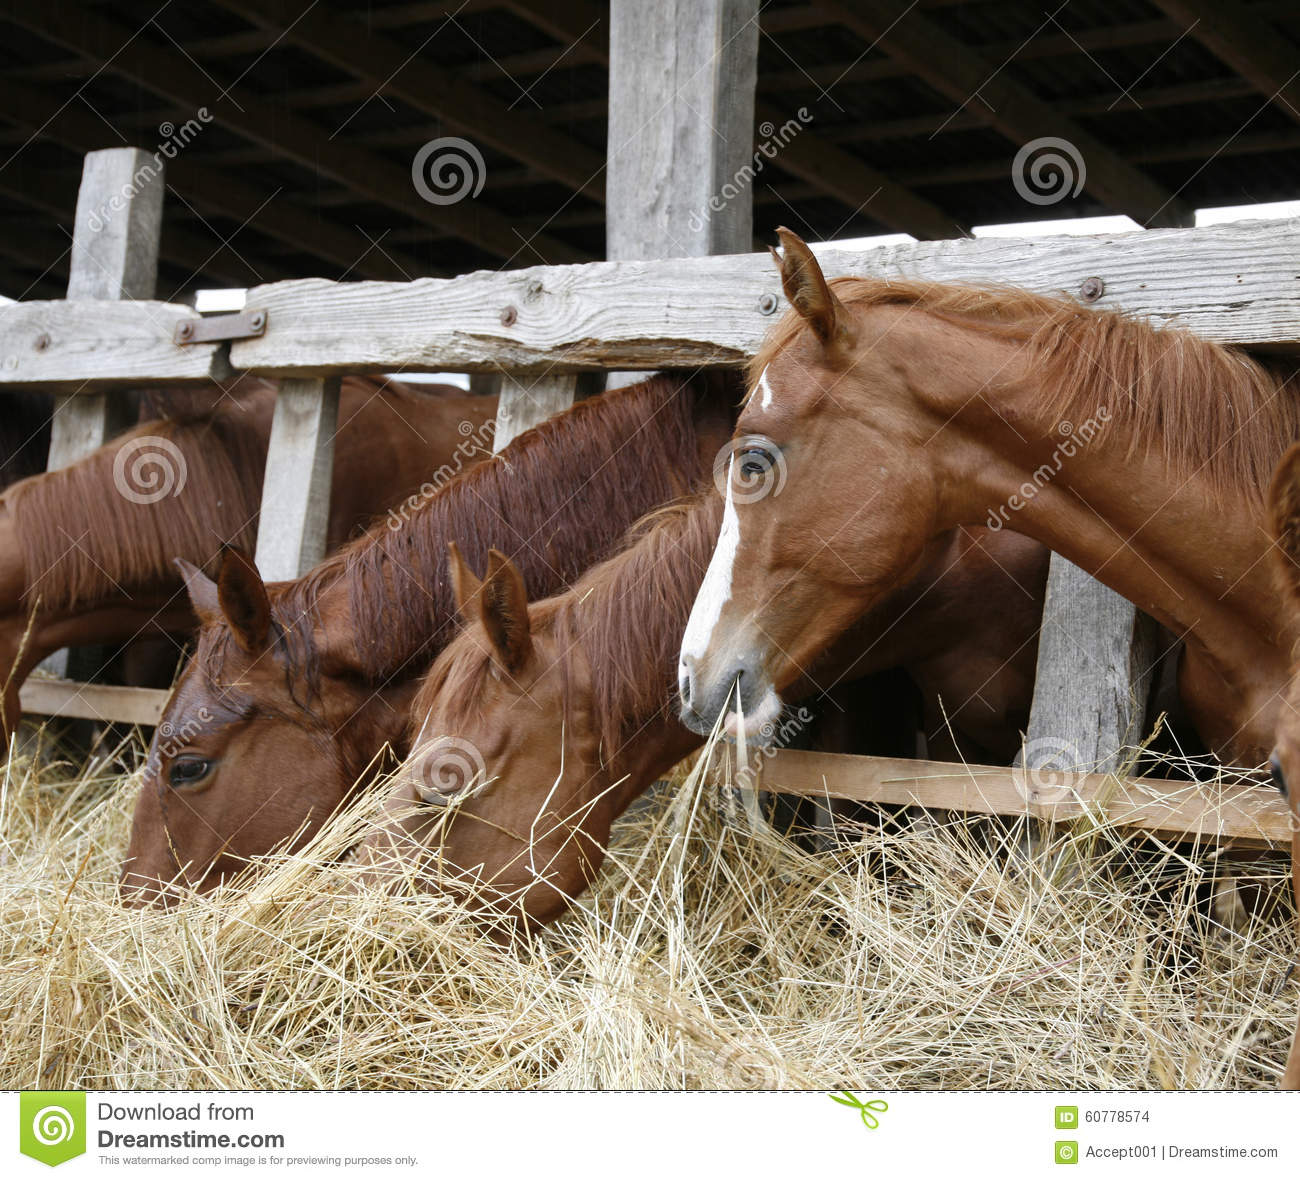 horse eating clipart - photo #46